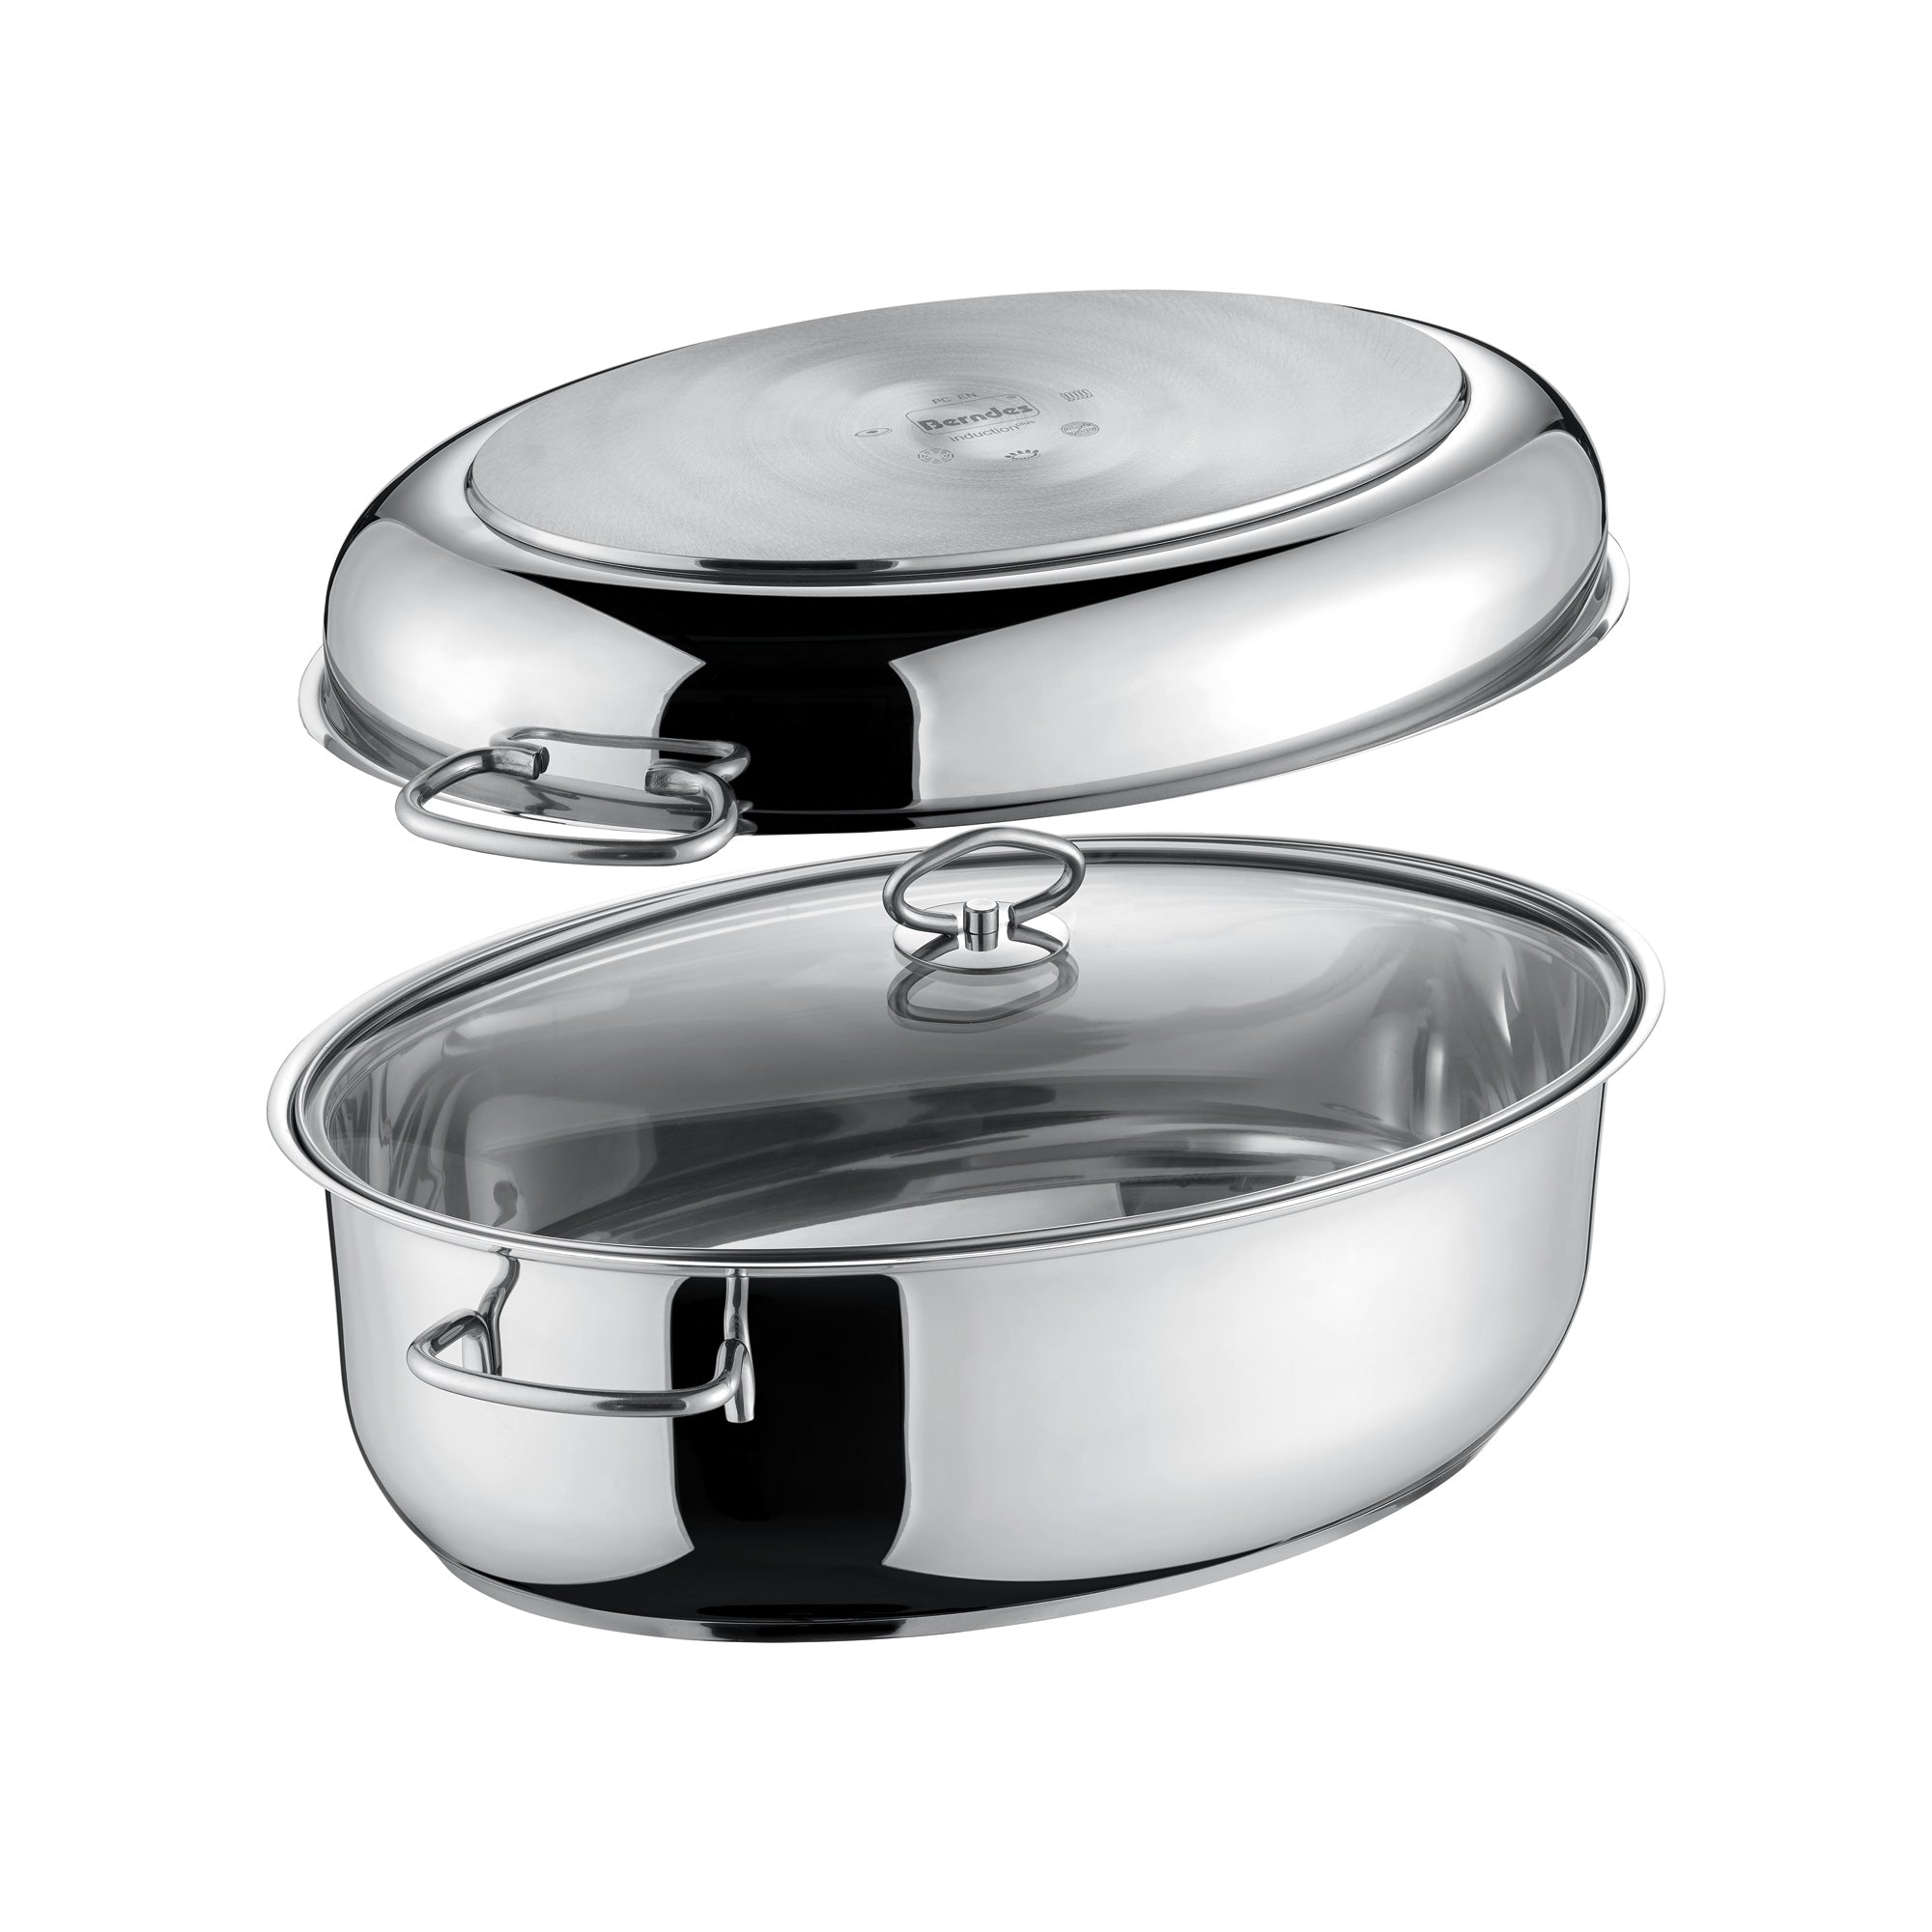 Oval stainless steel roaster, 3-in-1 including glass lid 38 x 25.5 cm,  stainless steel, polished - roaster from BERNDES – BERNDES Küche GmbH